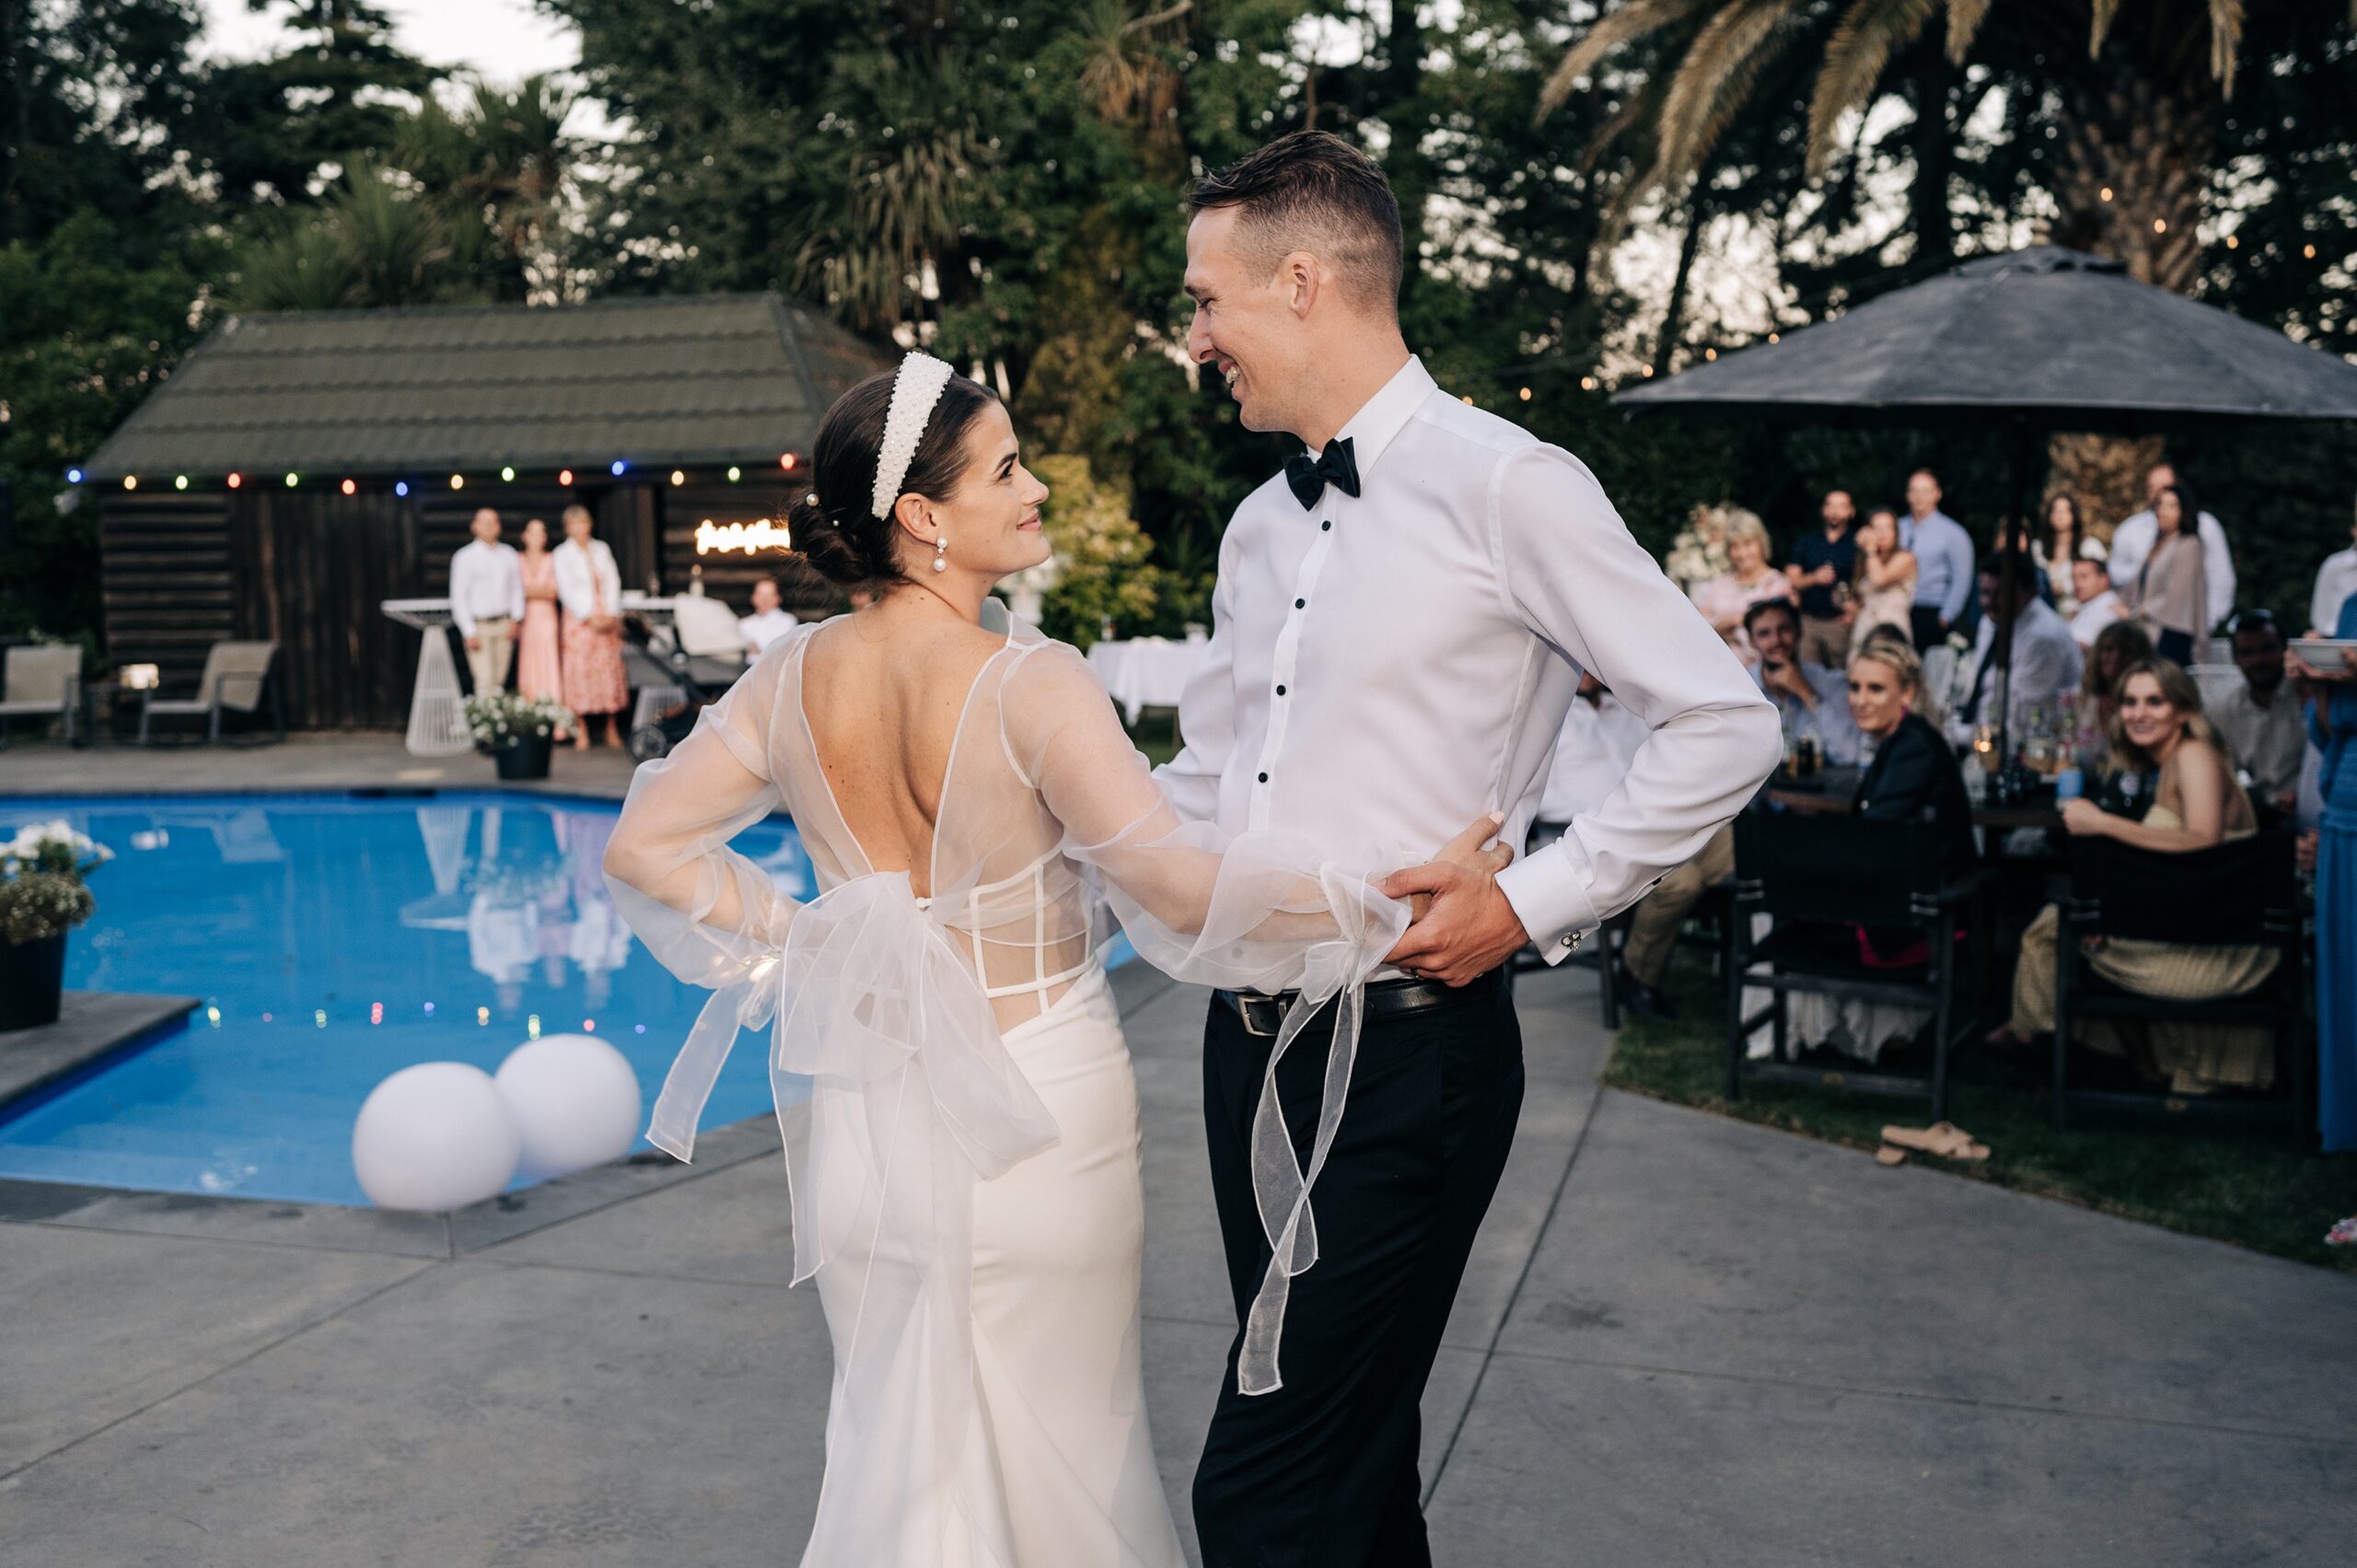 trish peng bride dancing beside a pool with groom in white shirt and black bowtie